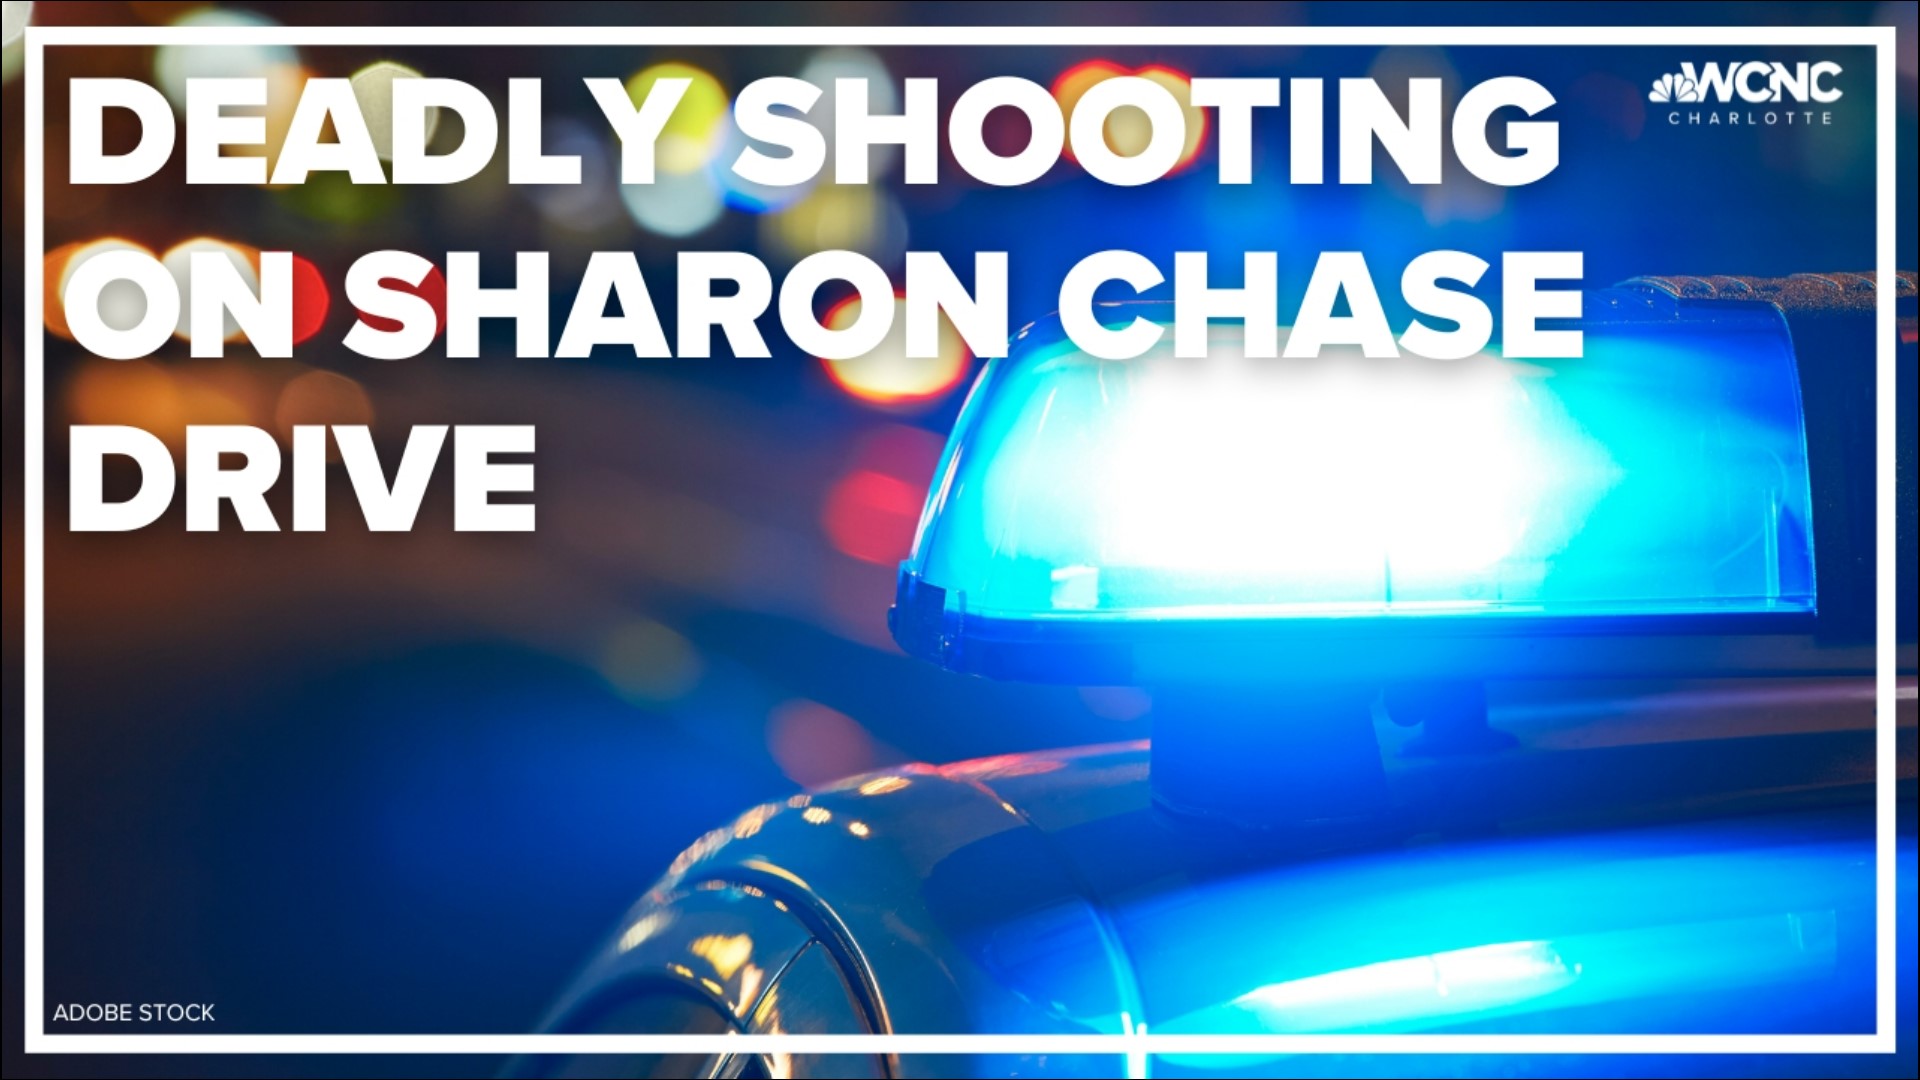 Police say a person is dead after a shooting in the 4500 block of Sharon Chase